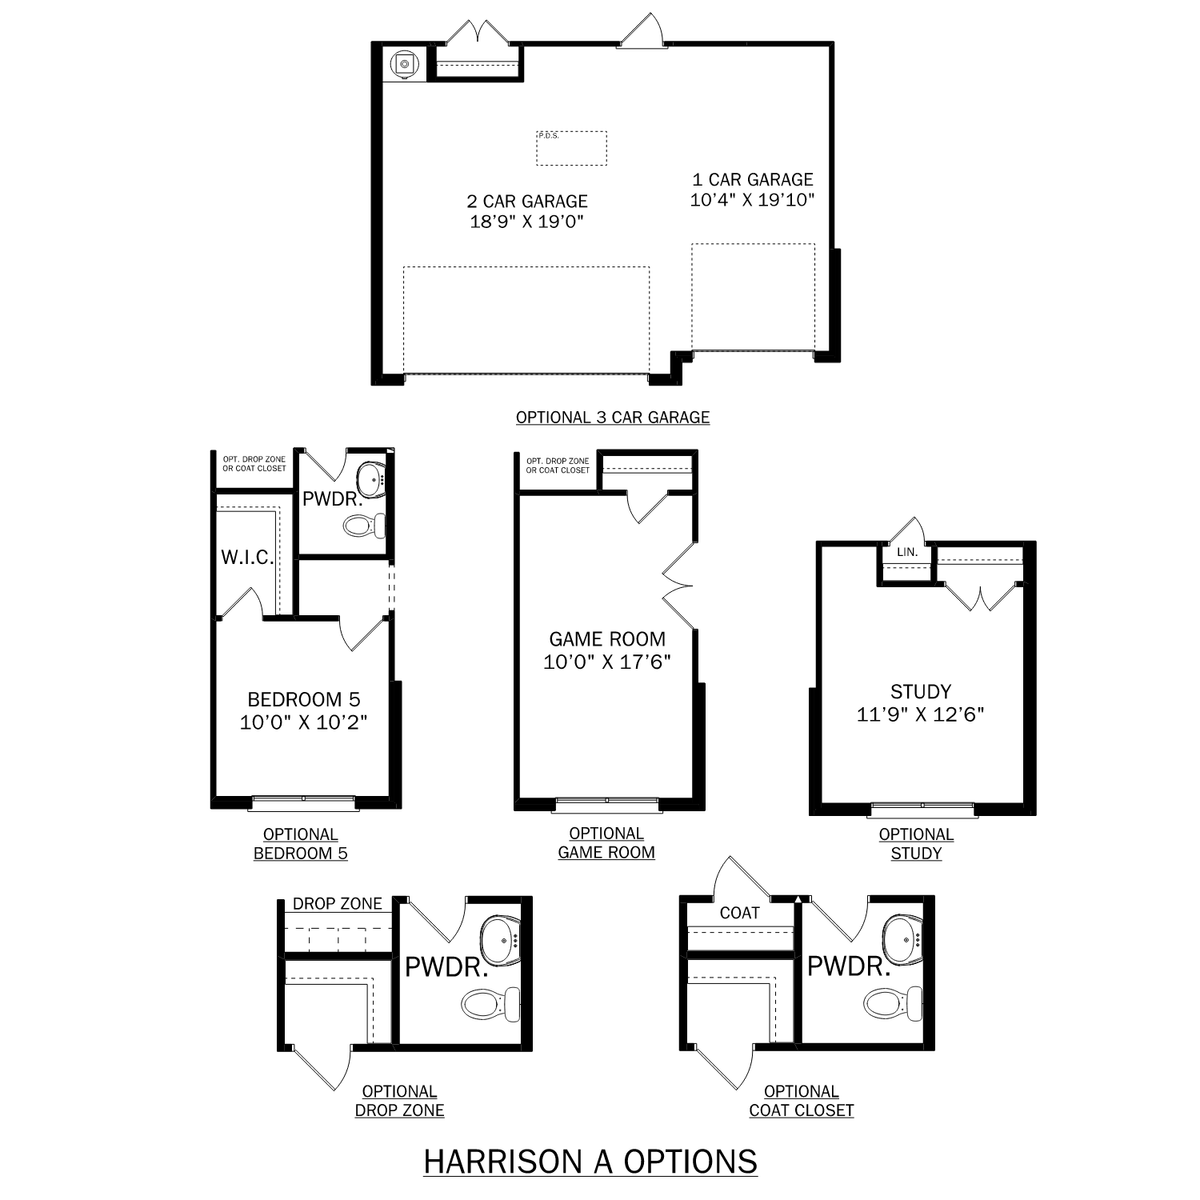 2 - The Harrison buildable floor plan layout in Davidson Homes' Kendall Downs community.